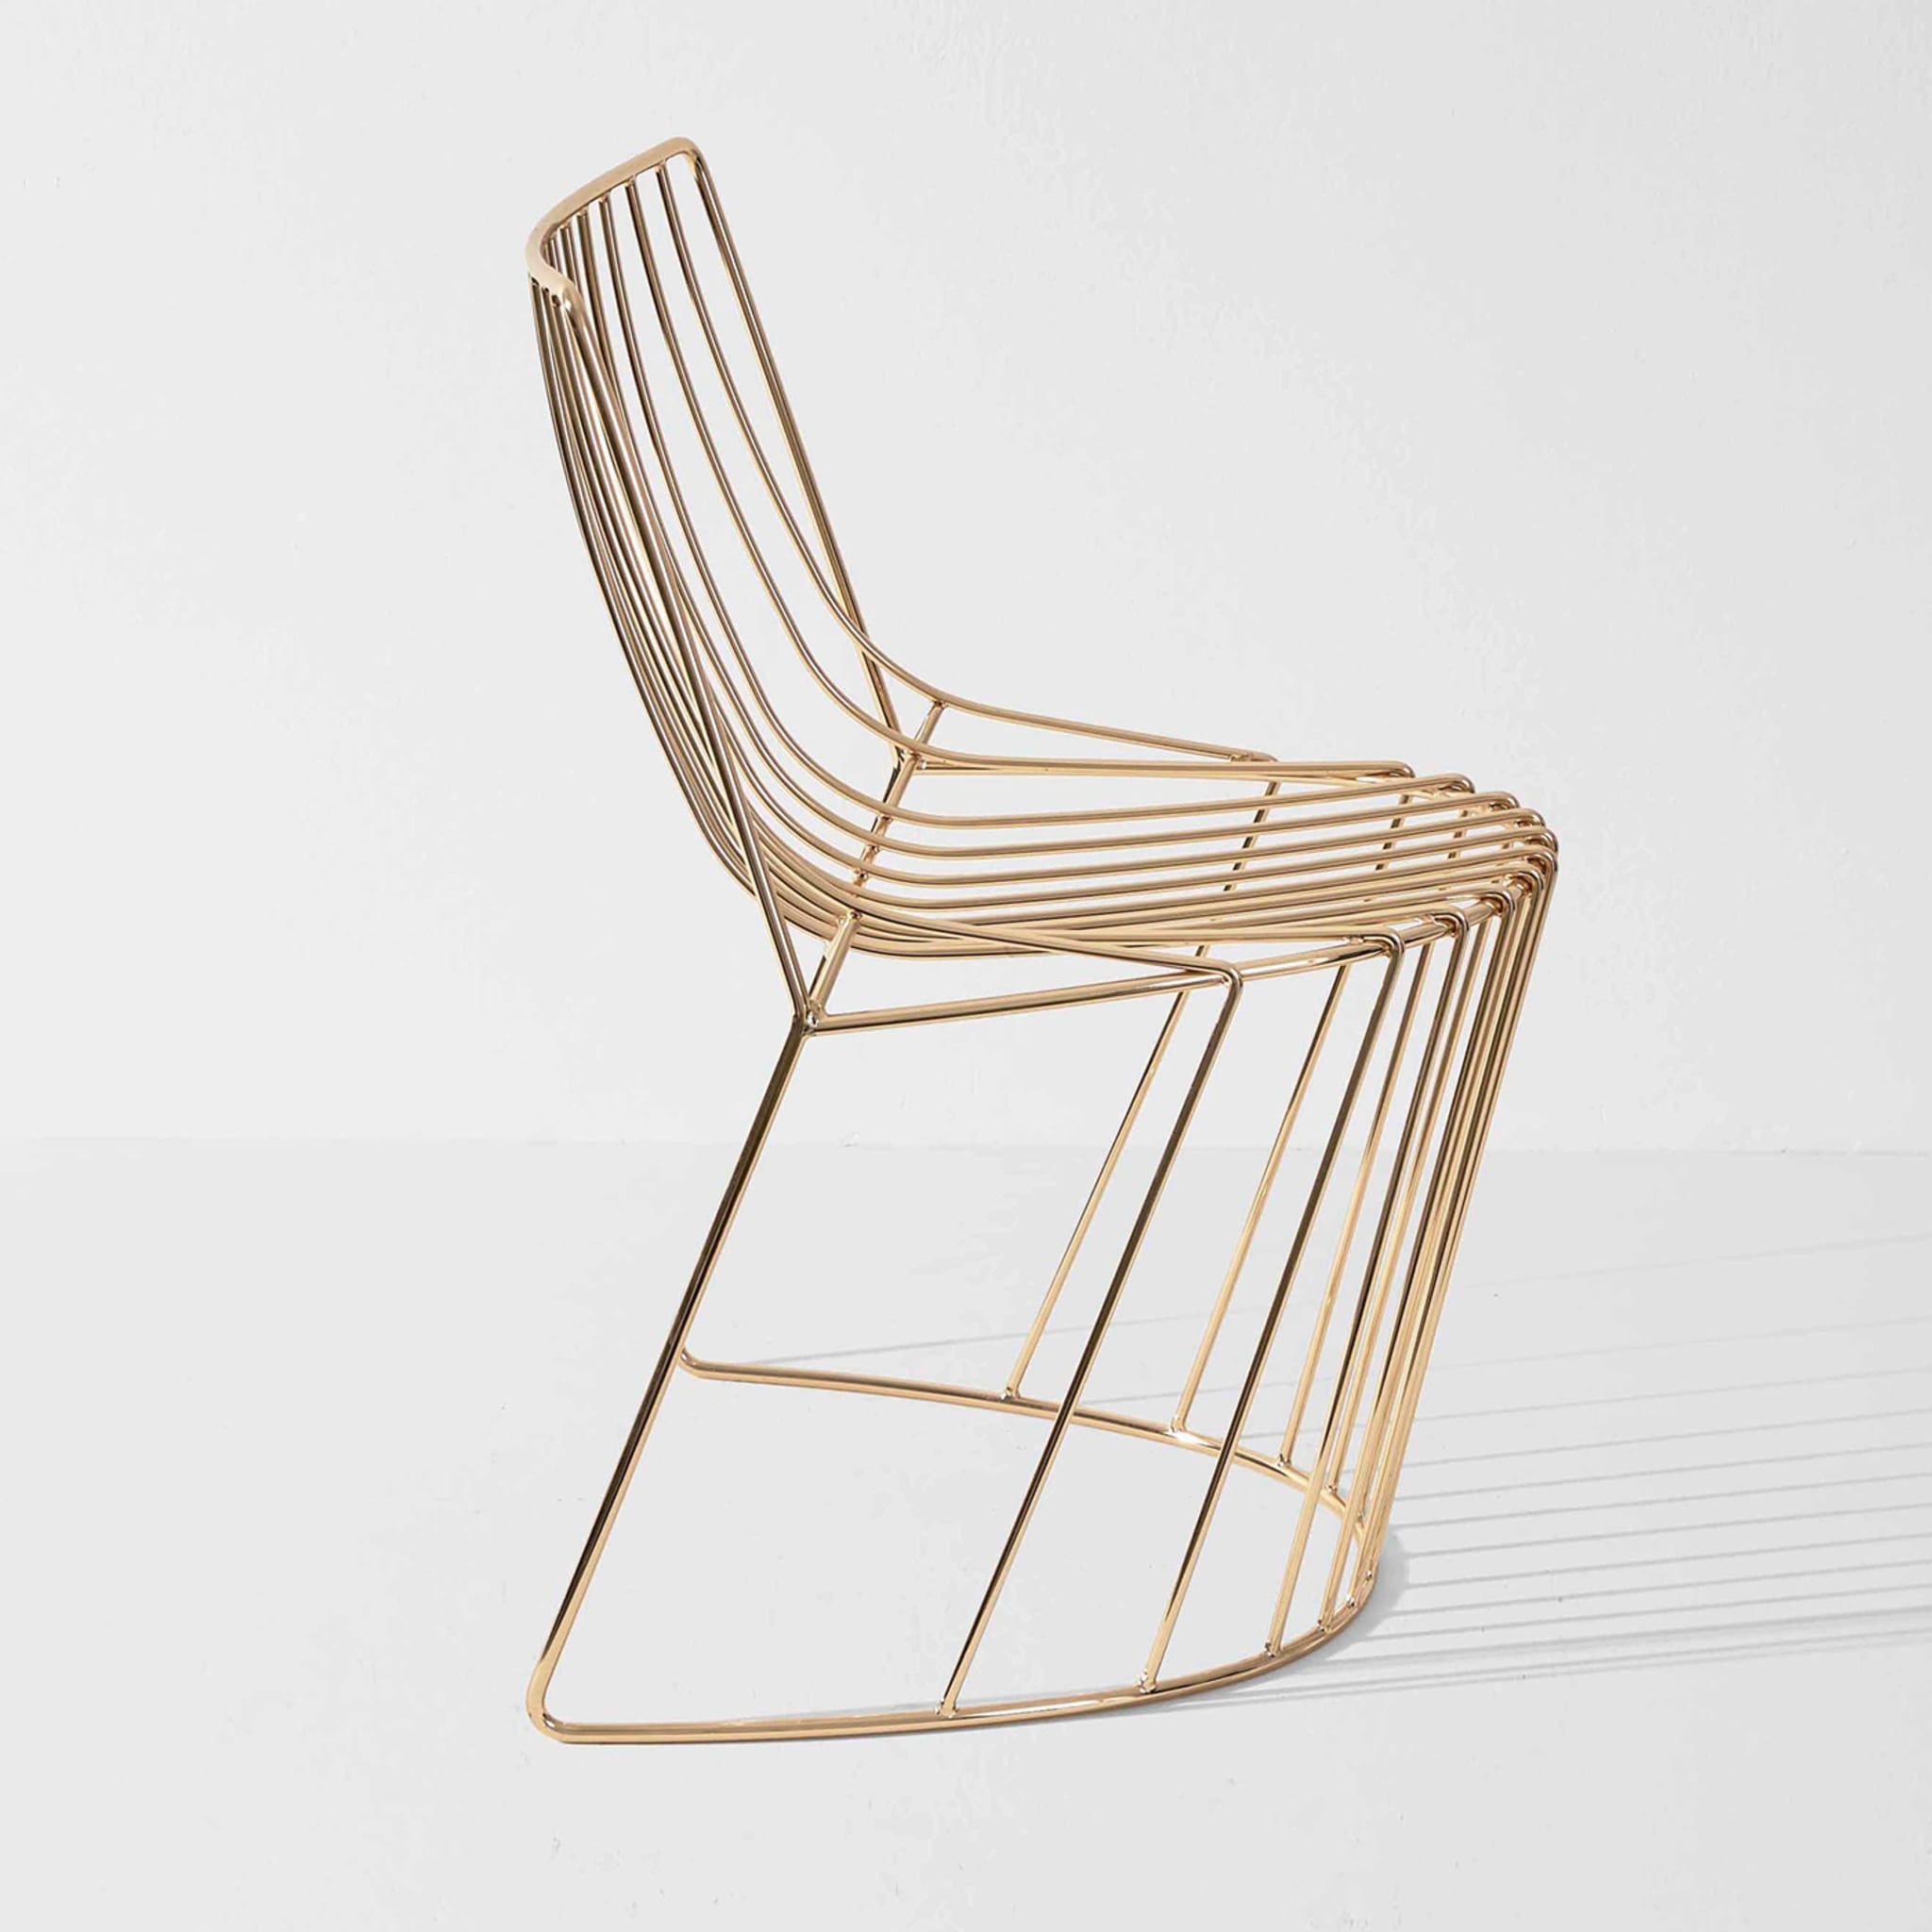 AMARONE LIGHT GOLD POLISHED CHAIR - Alternative view 1